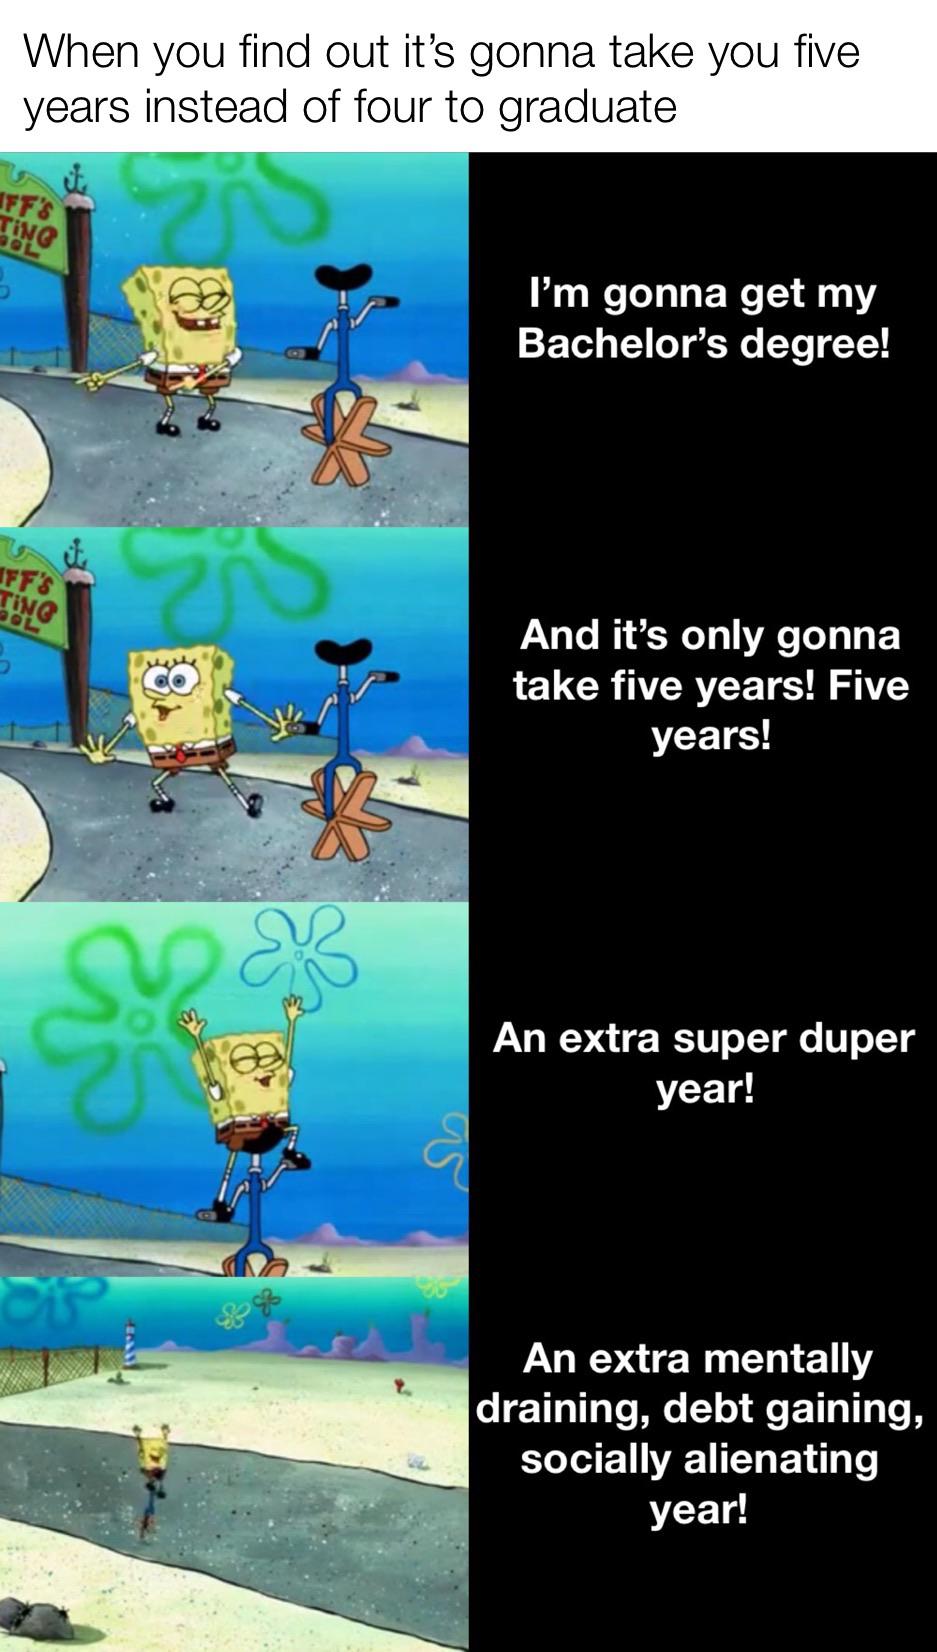 r/collegememes- college dank memes - cartoon - When you find out it's gonna take you five years instead of four to graduate Ff'S Ting U I'm gonna get my Bachelor's degree! Iff's And it's only gonna take five years! Five years! Su An extra super duper year